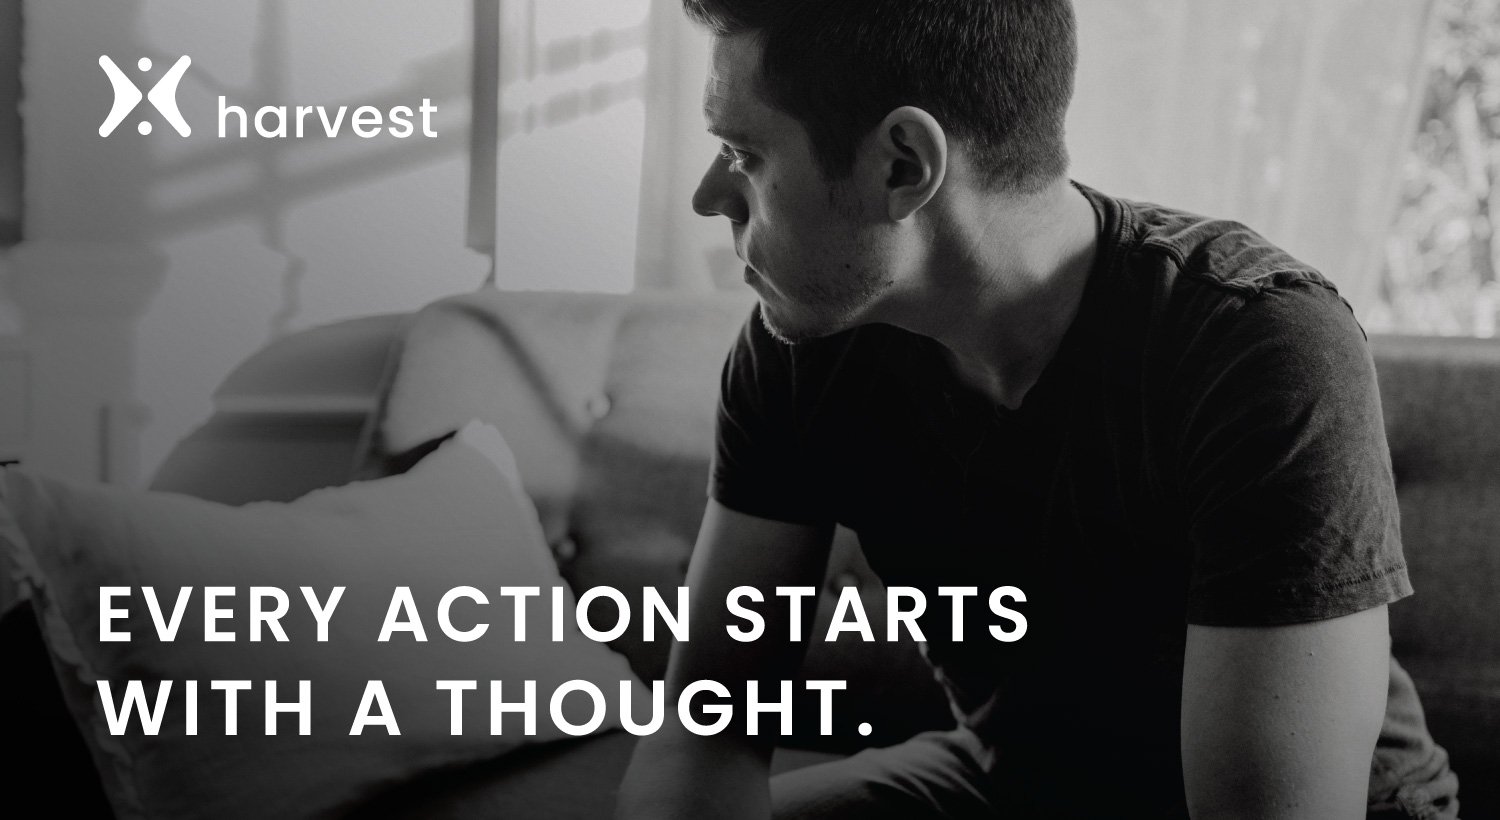 Every action starts with a thought. And what we think is what we’ll do.